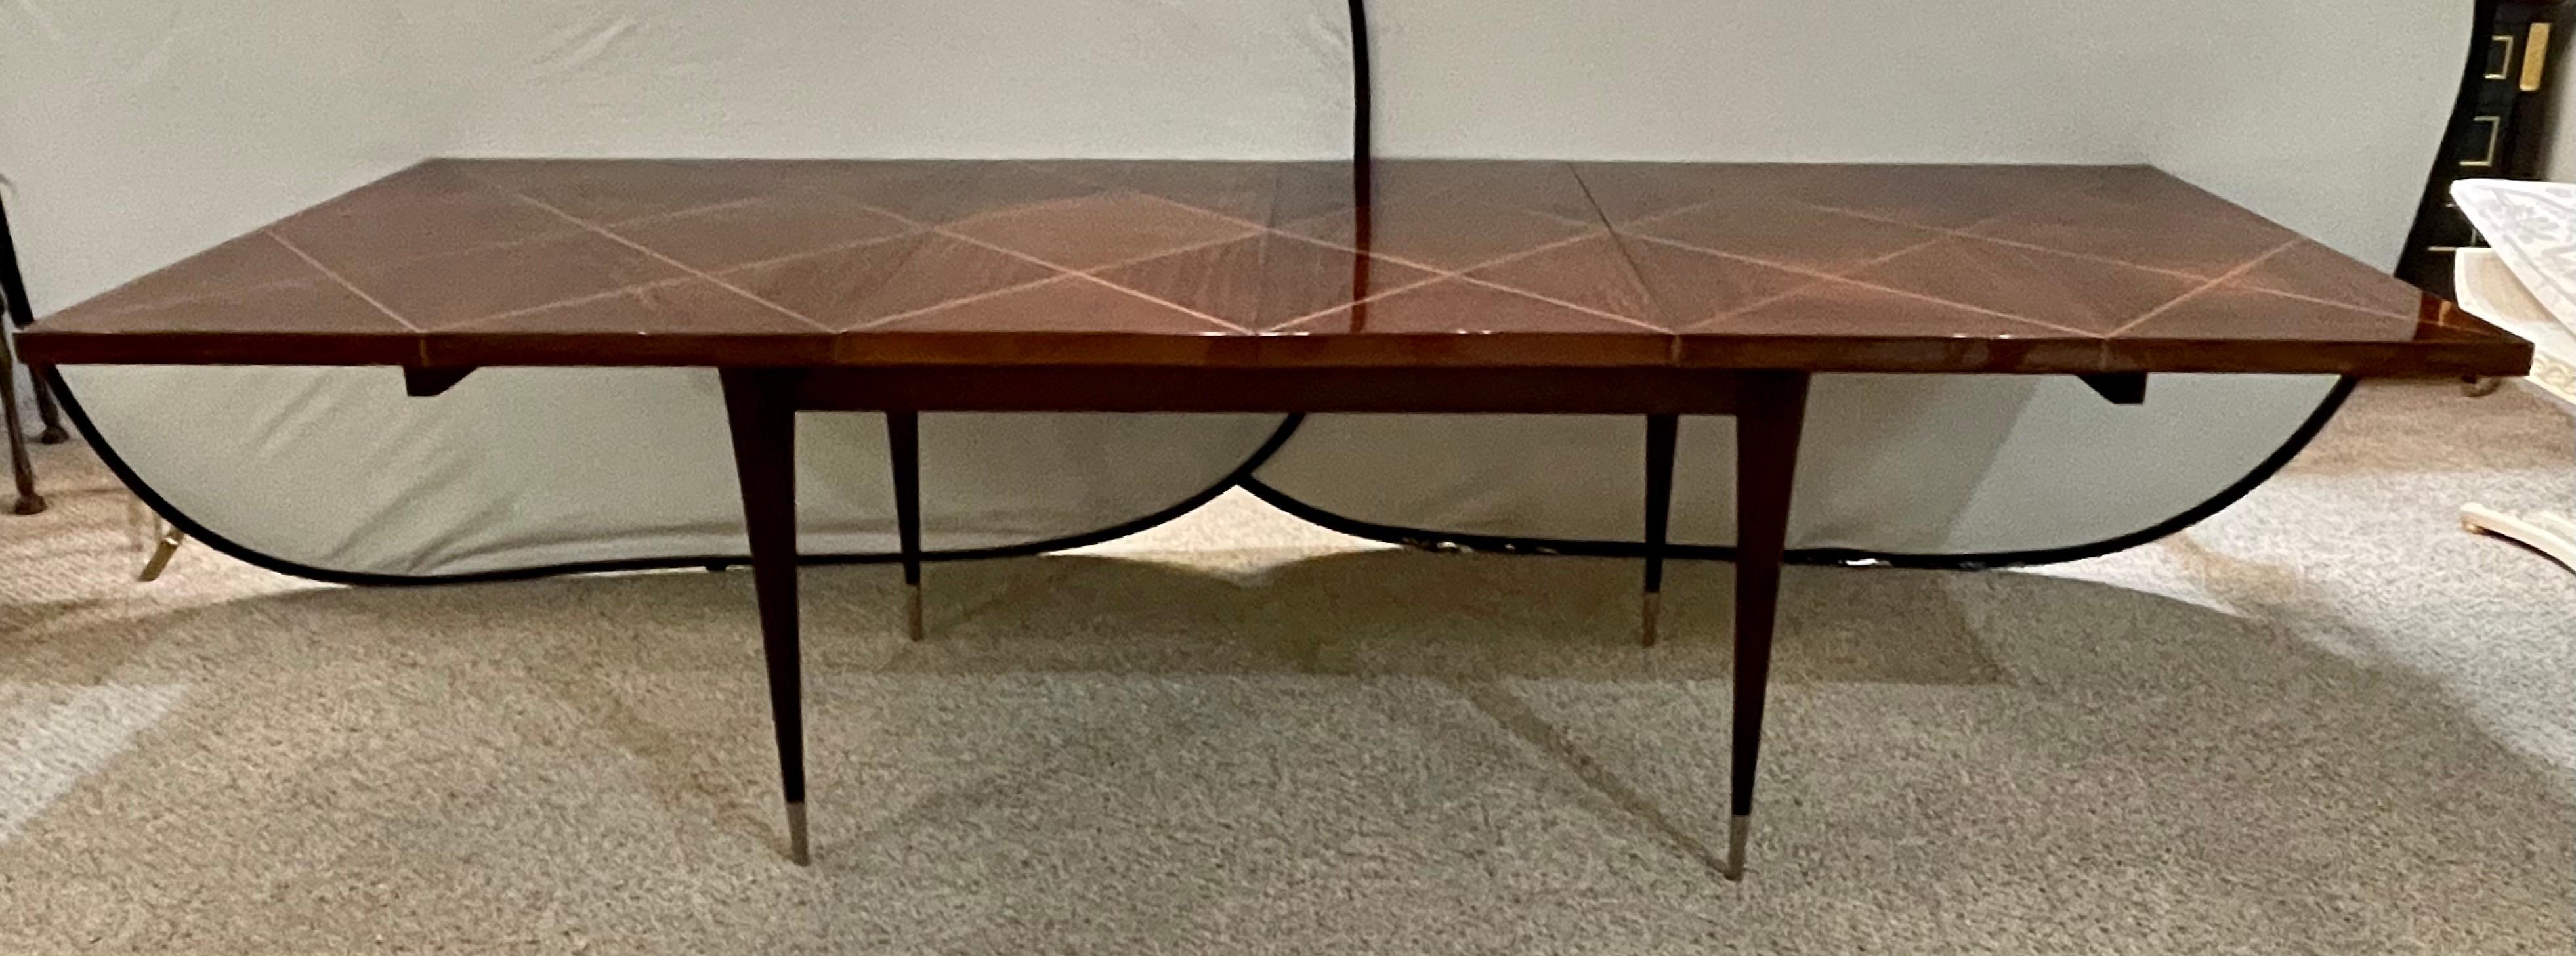 A Tommi Parzinger Originals Dining Table Fully Refinished with Two Leaves 1